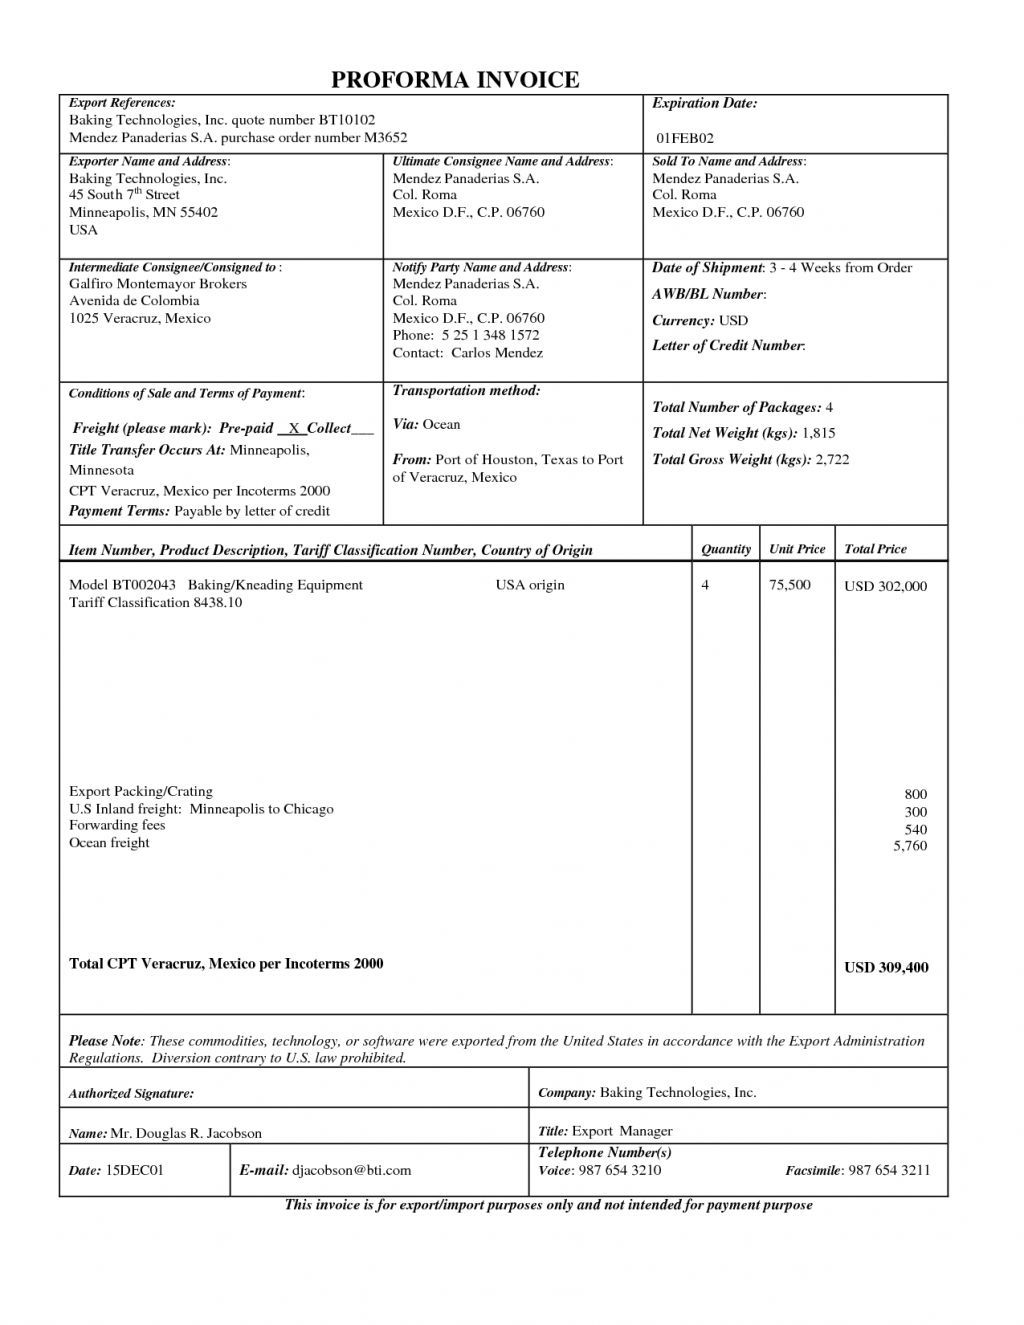 sample export invoice export proforma invoice excel a picture of invoice proforma for an exporting company